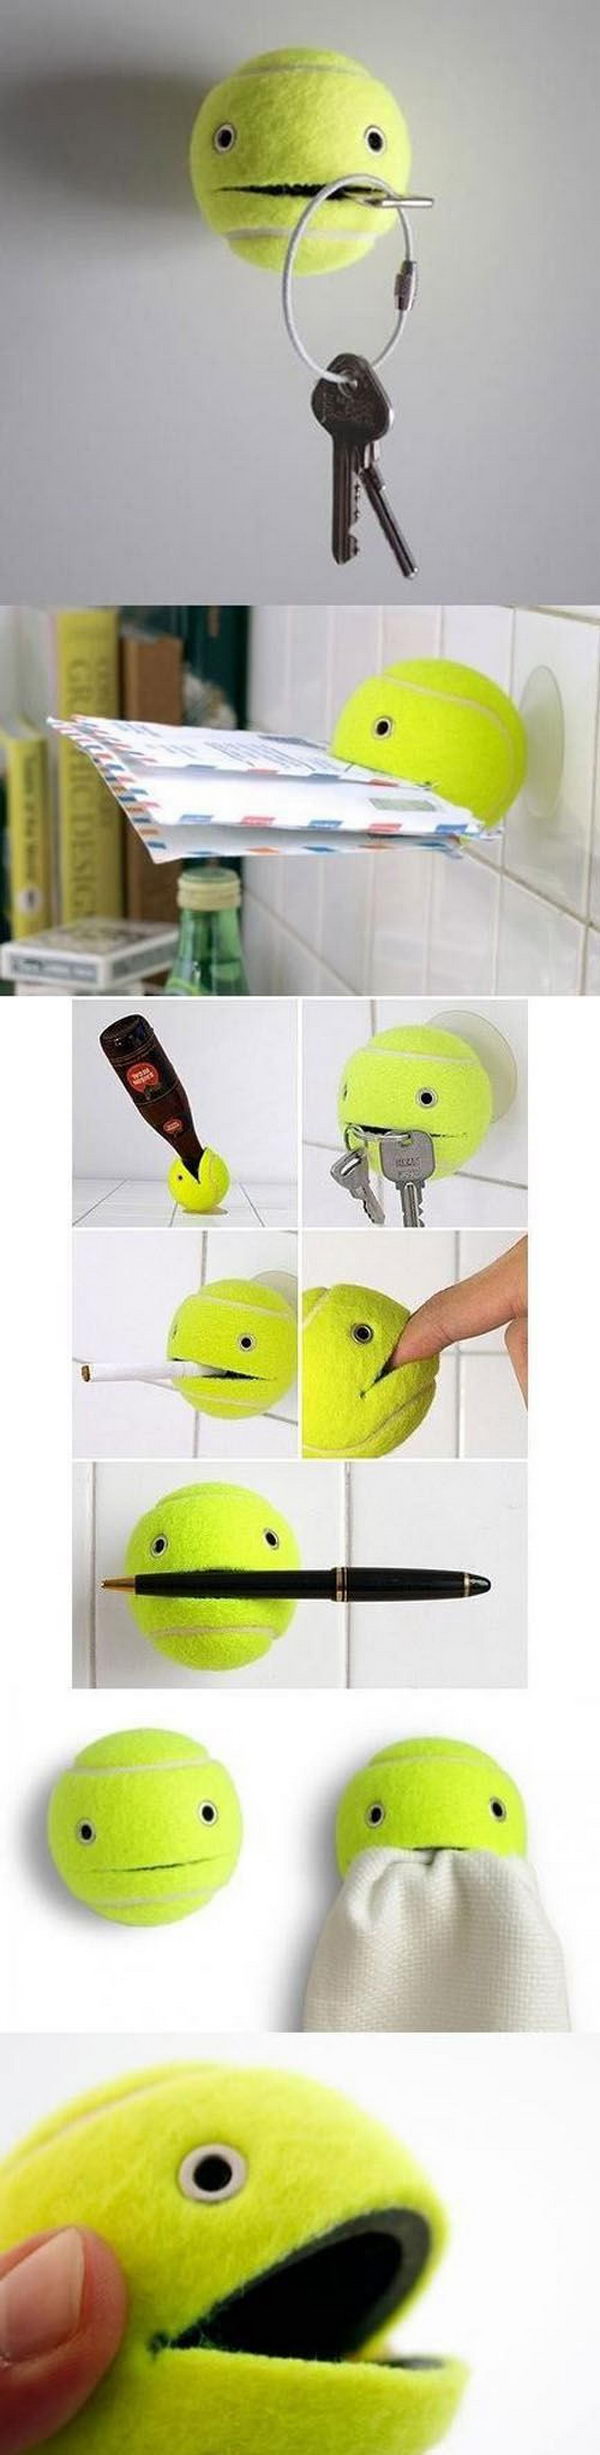 Tennis Ball as a key Holder. A genius idea to DIY a functional, funny and adorable key holder with a tennis ball. See the tutorial 